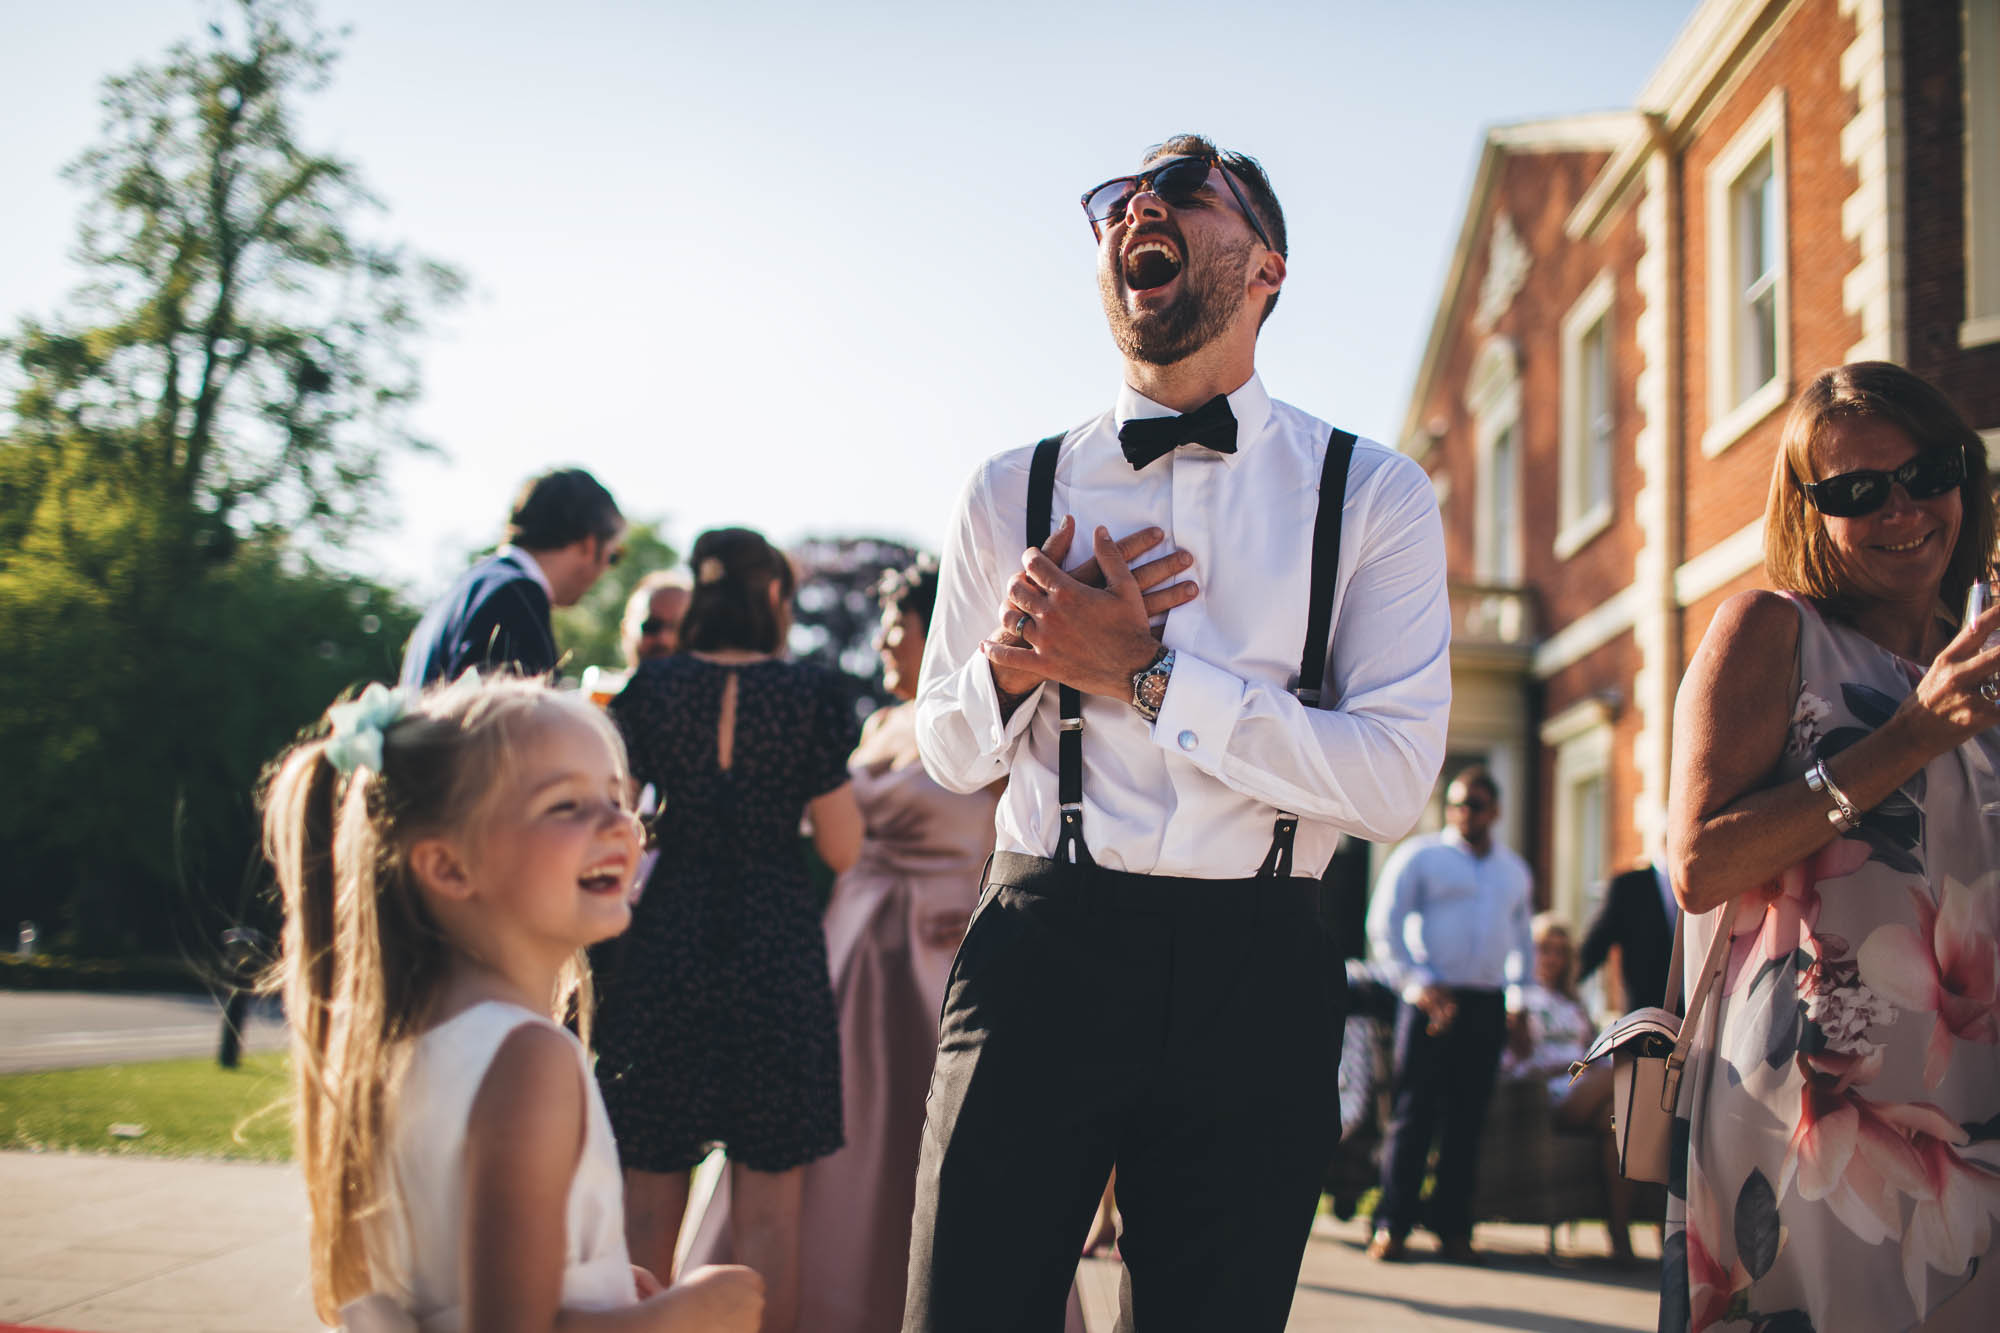 Groom wears sunglasses and laughs at something hilarious outside wedding venue